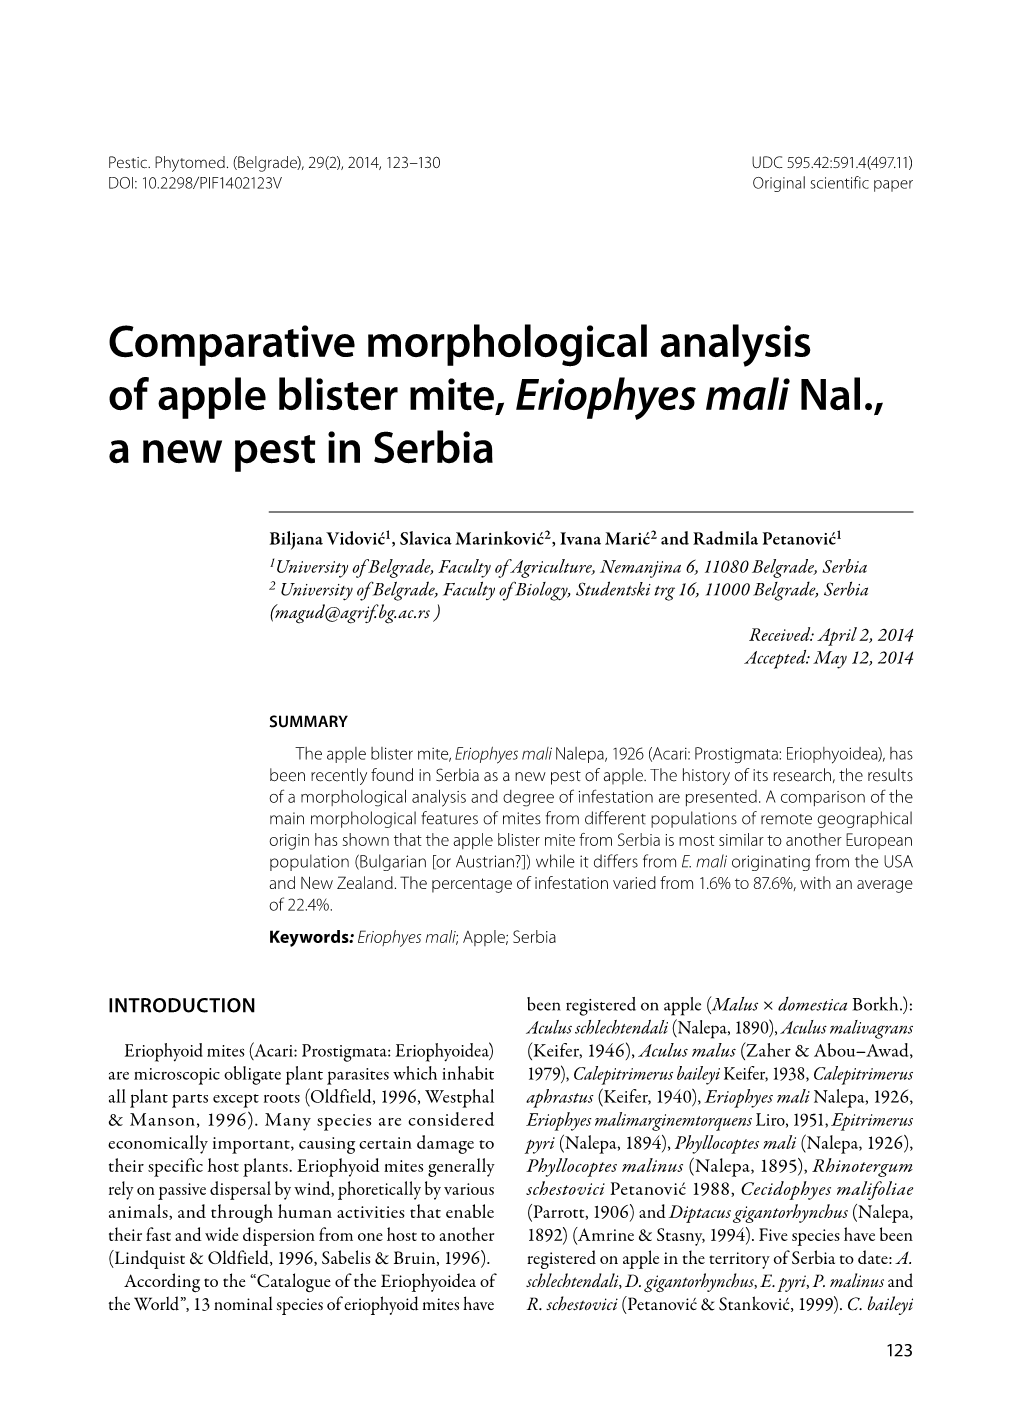 Comparative Morphological Analysis of Apple Blister Mite, Eriophyes Mali Nal., a New Pest in Serbia